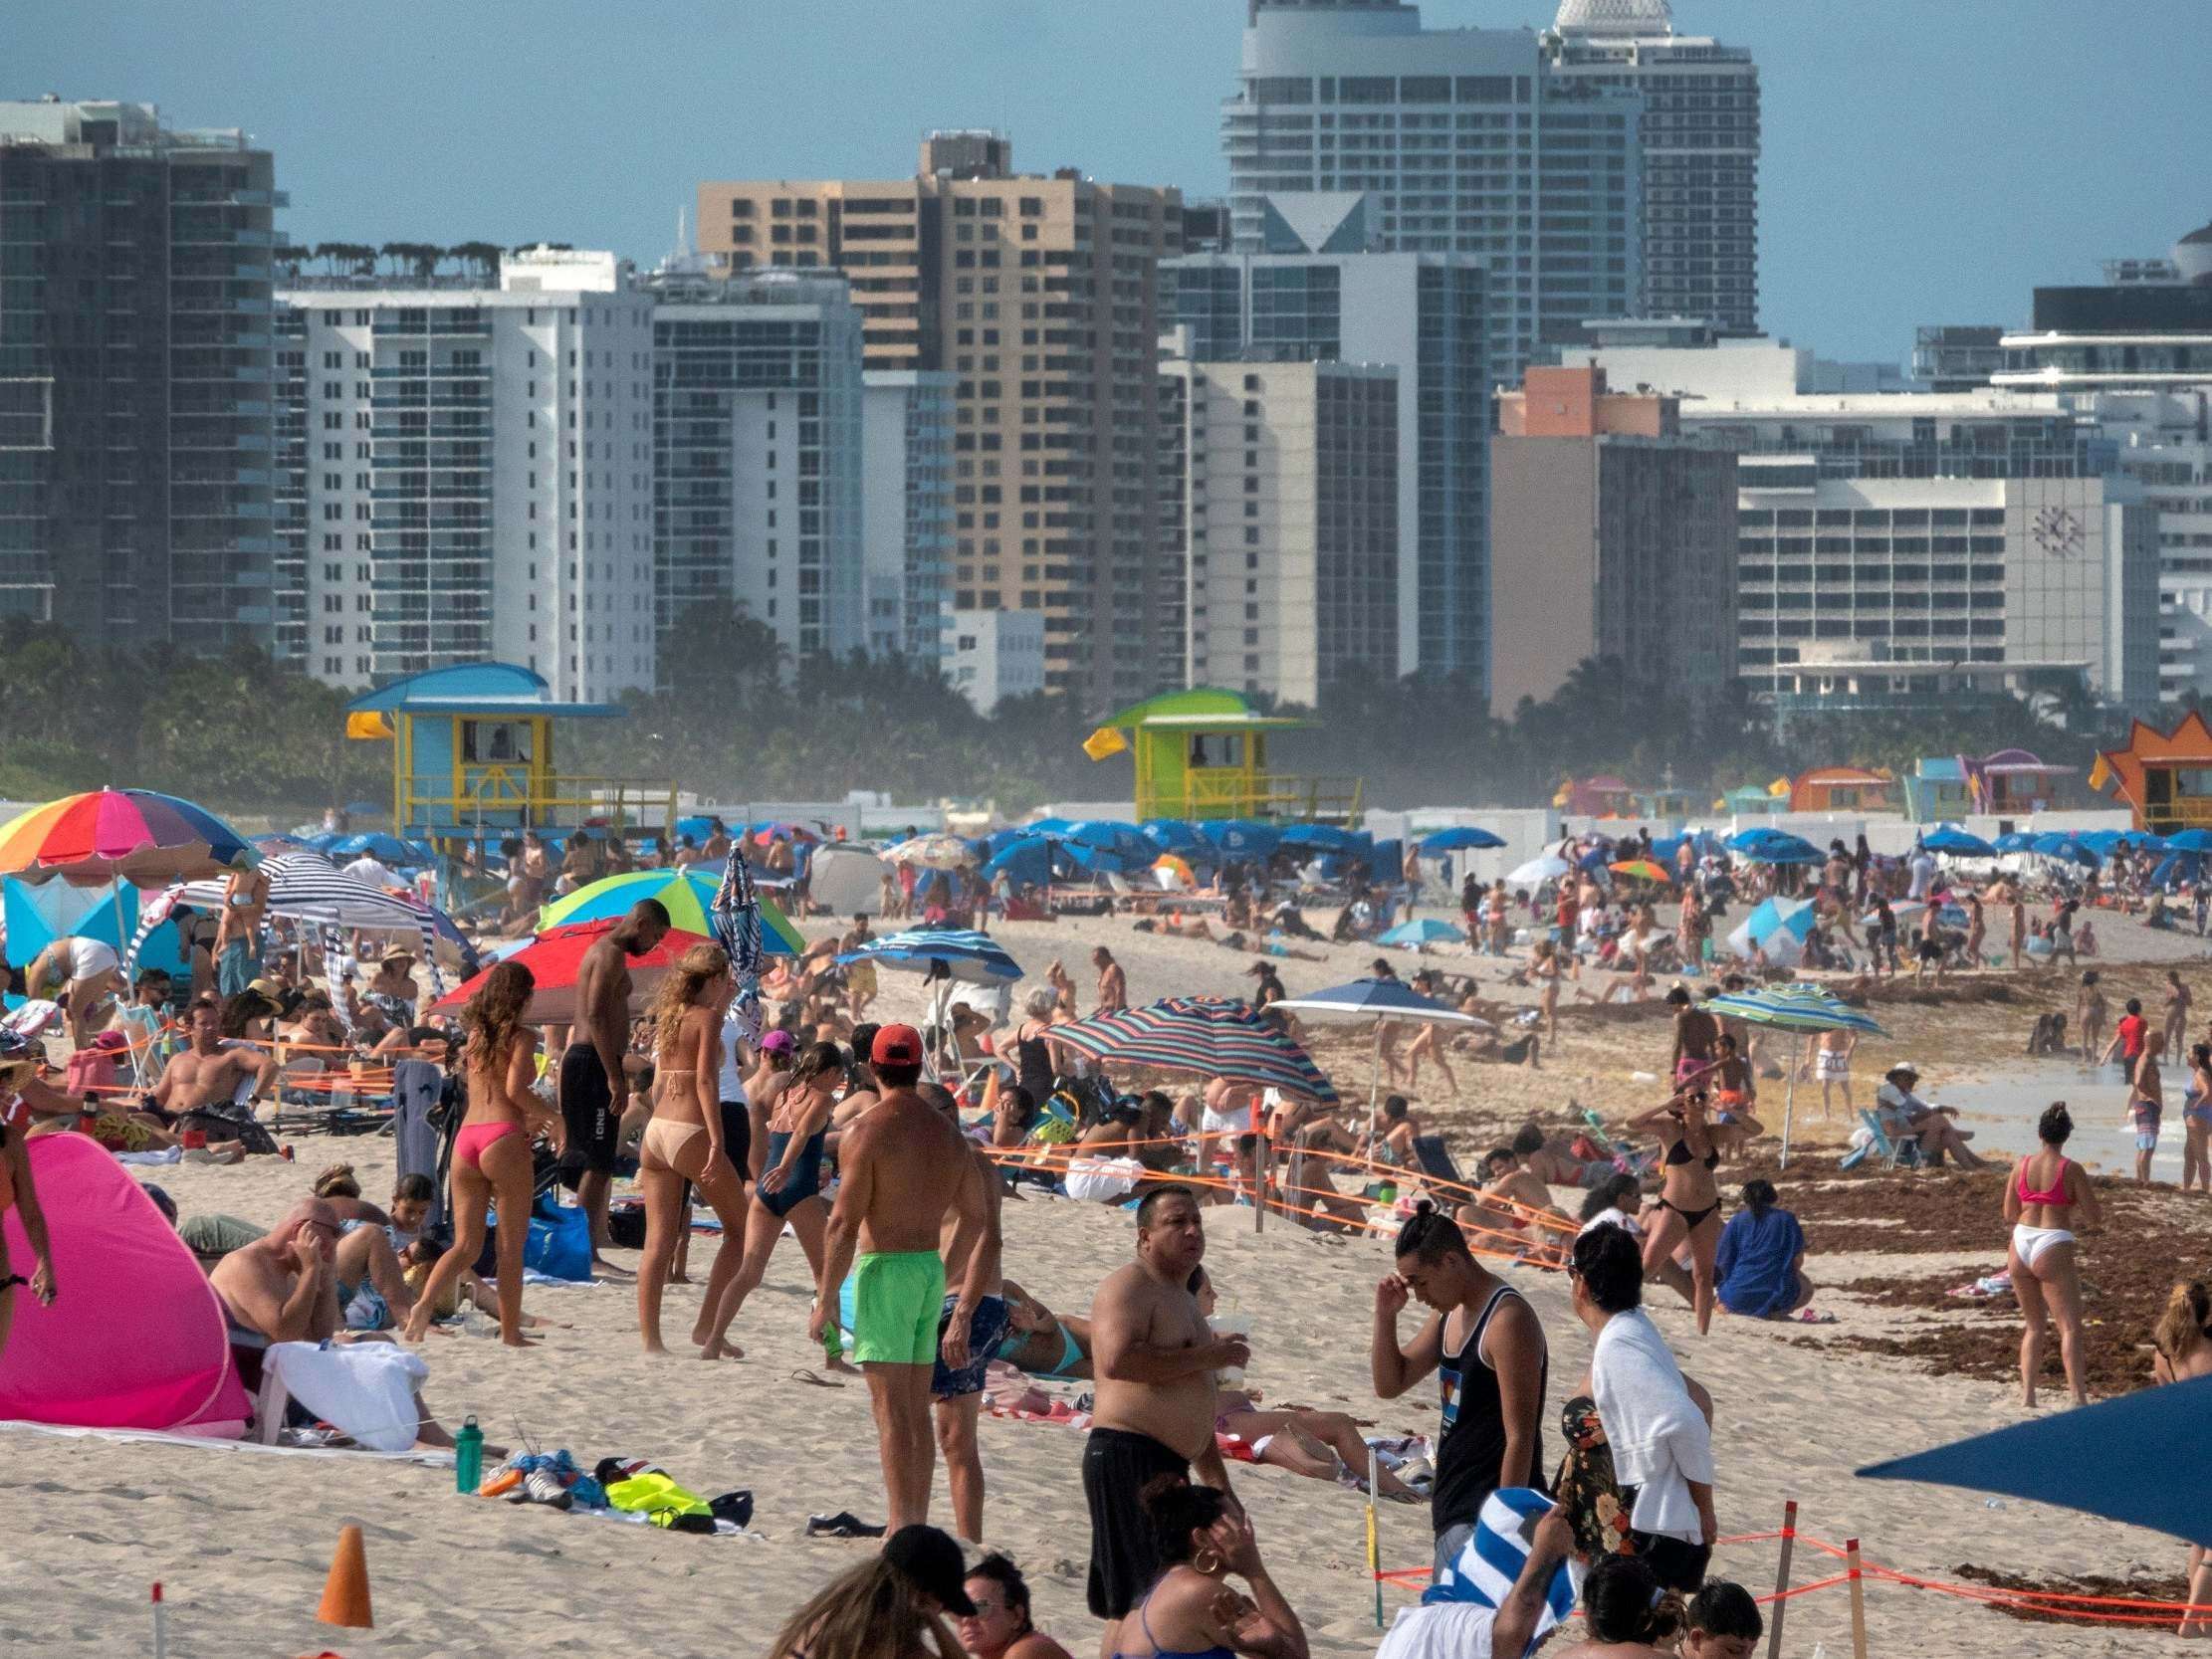 image for Florida beaches will close for Fourth of July weekend over coronavirus concerns